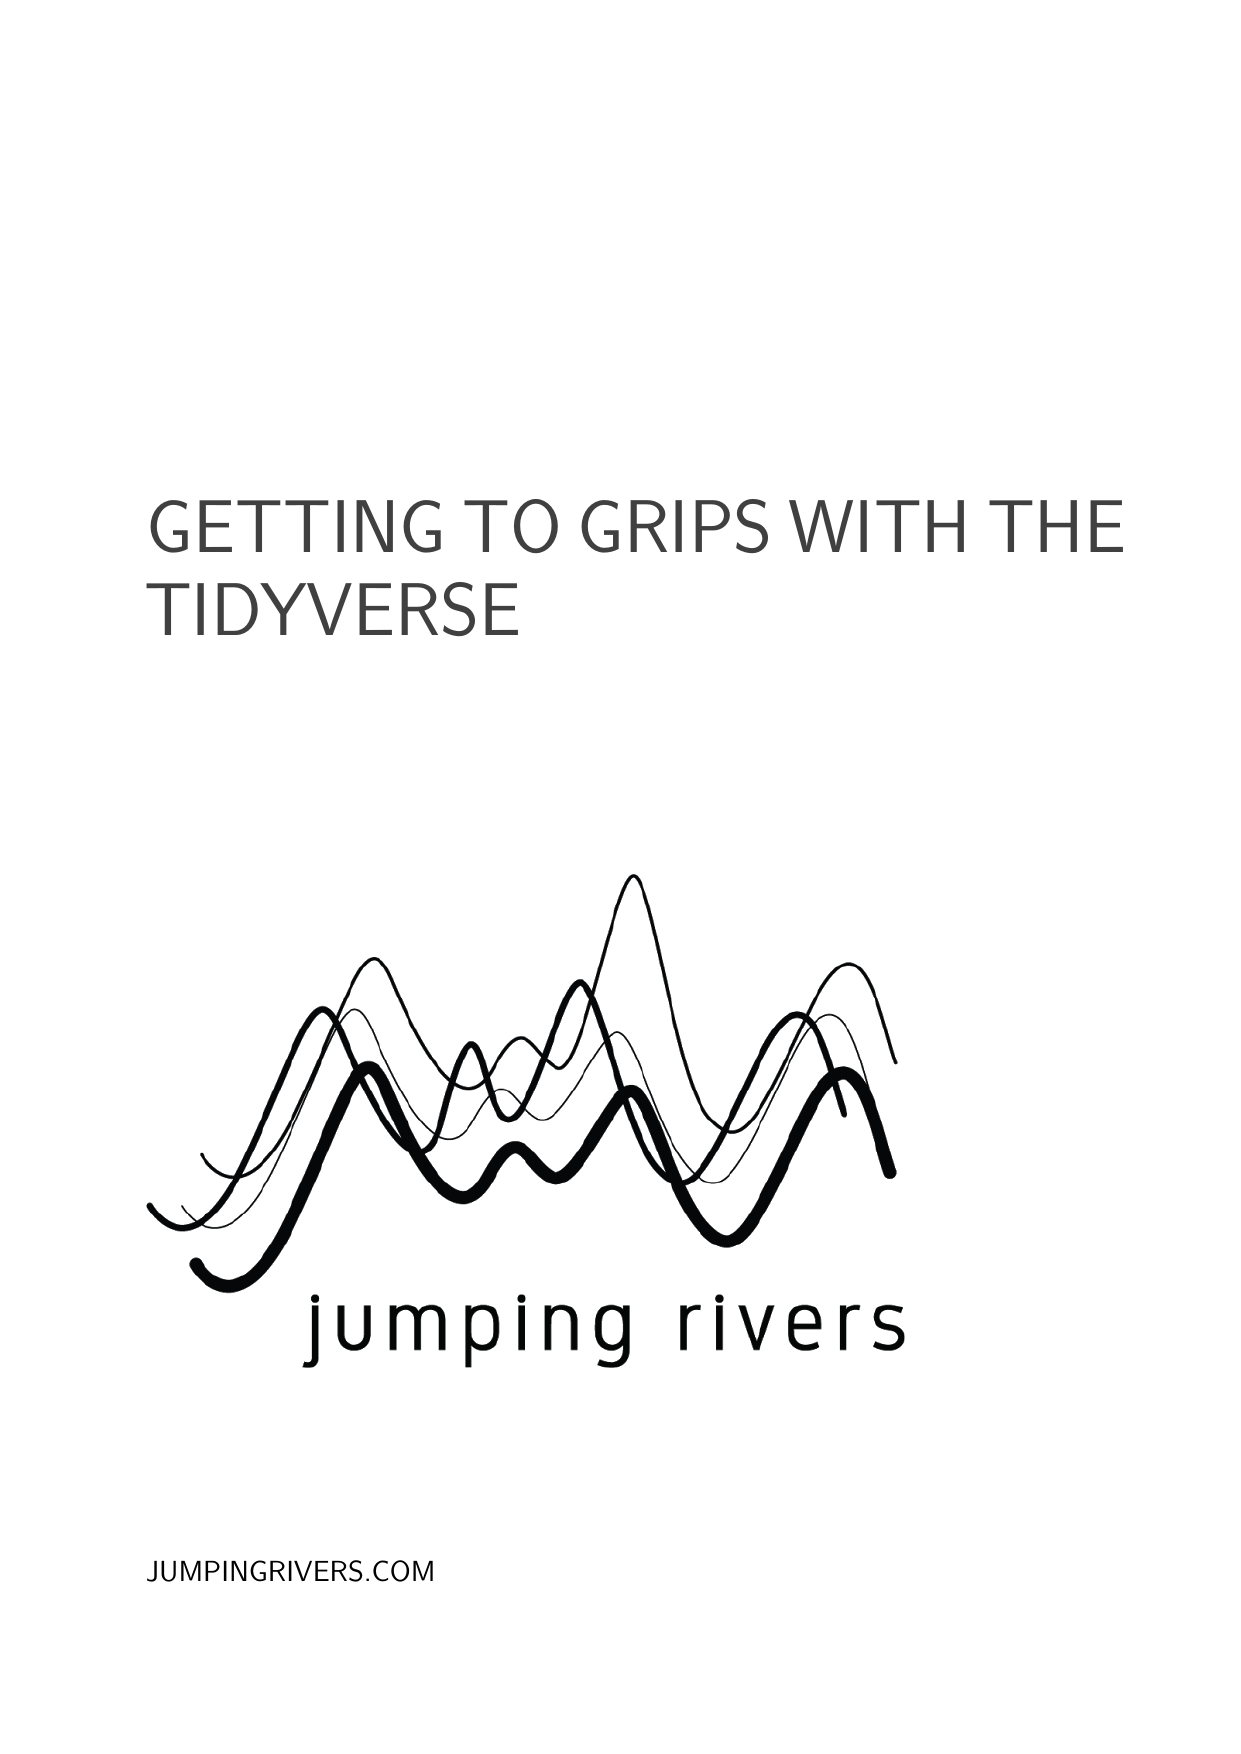 Example course material for 'Getting to Grips with the Tidyverse